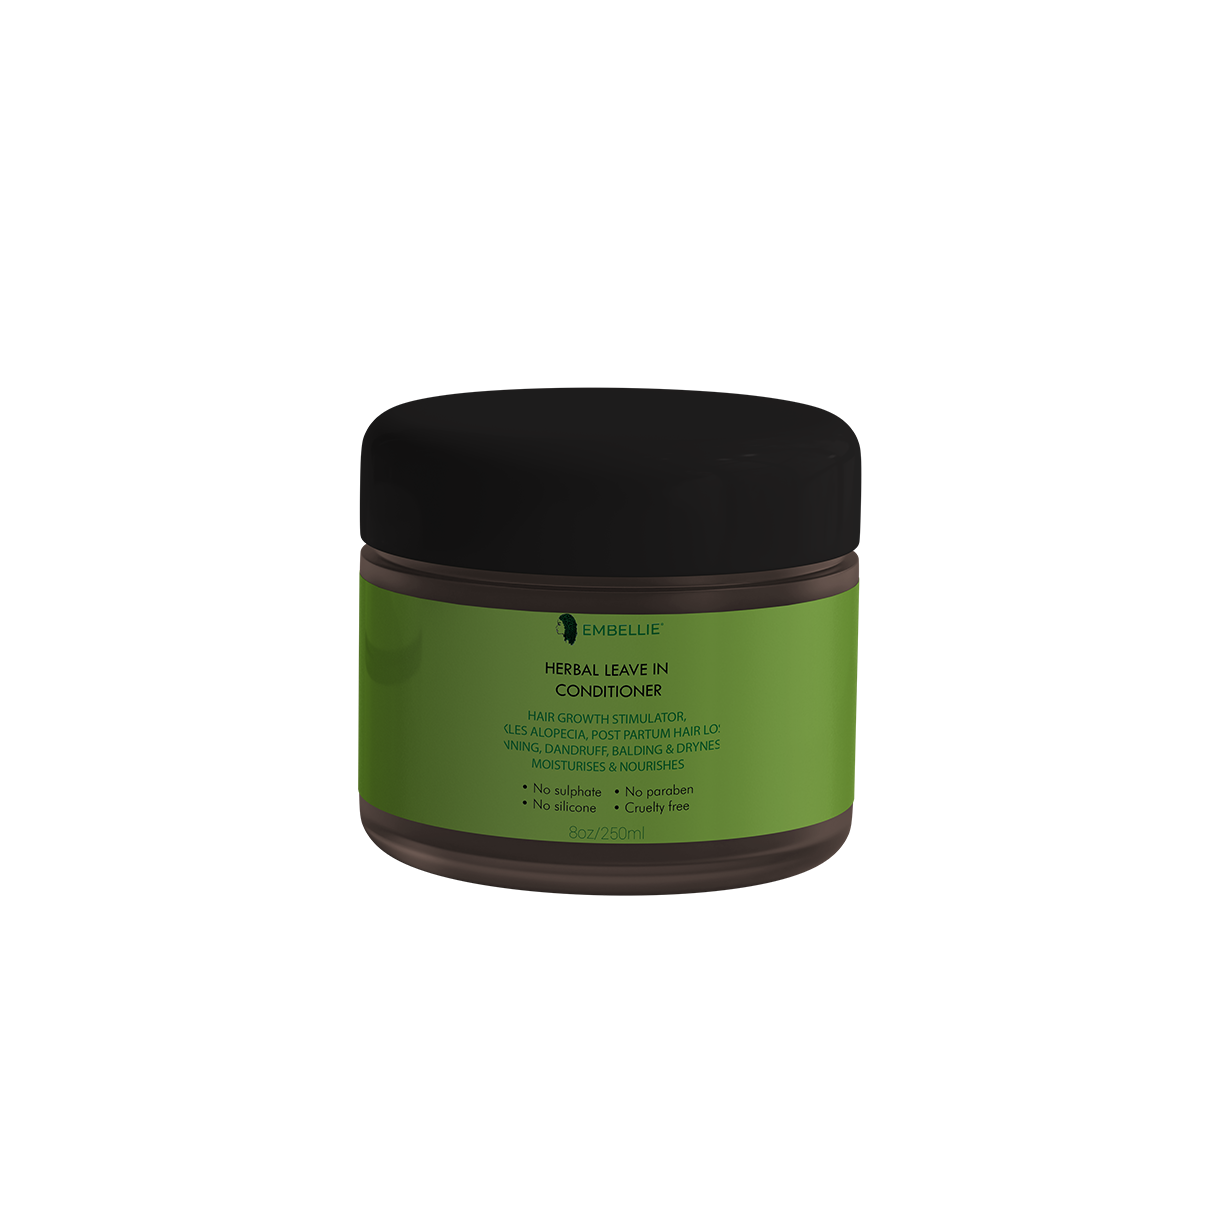 Herbal leave in conditioner with hemp oil